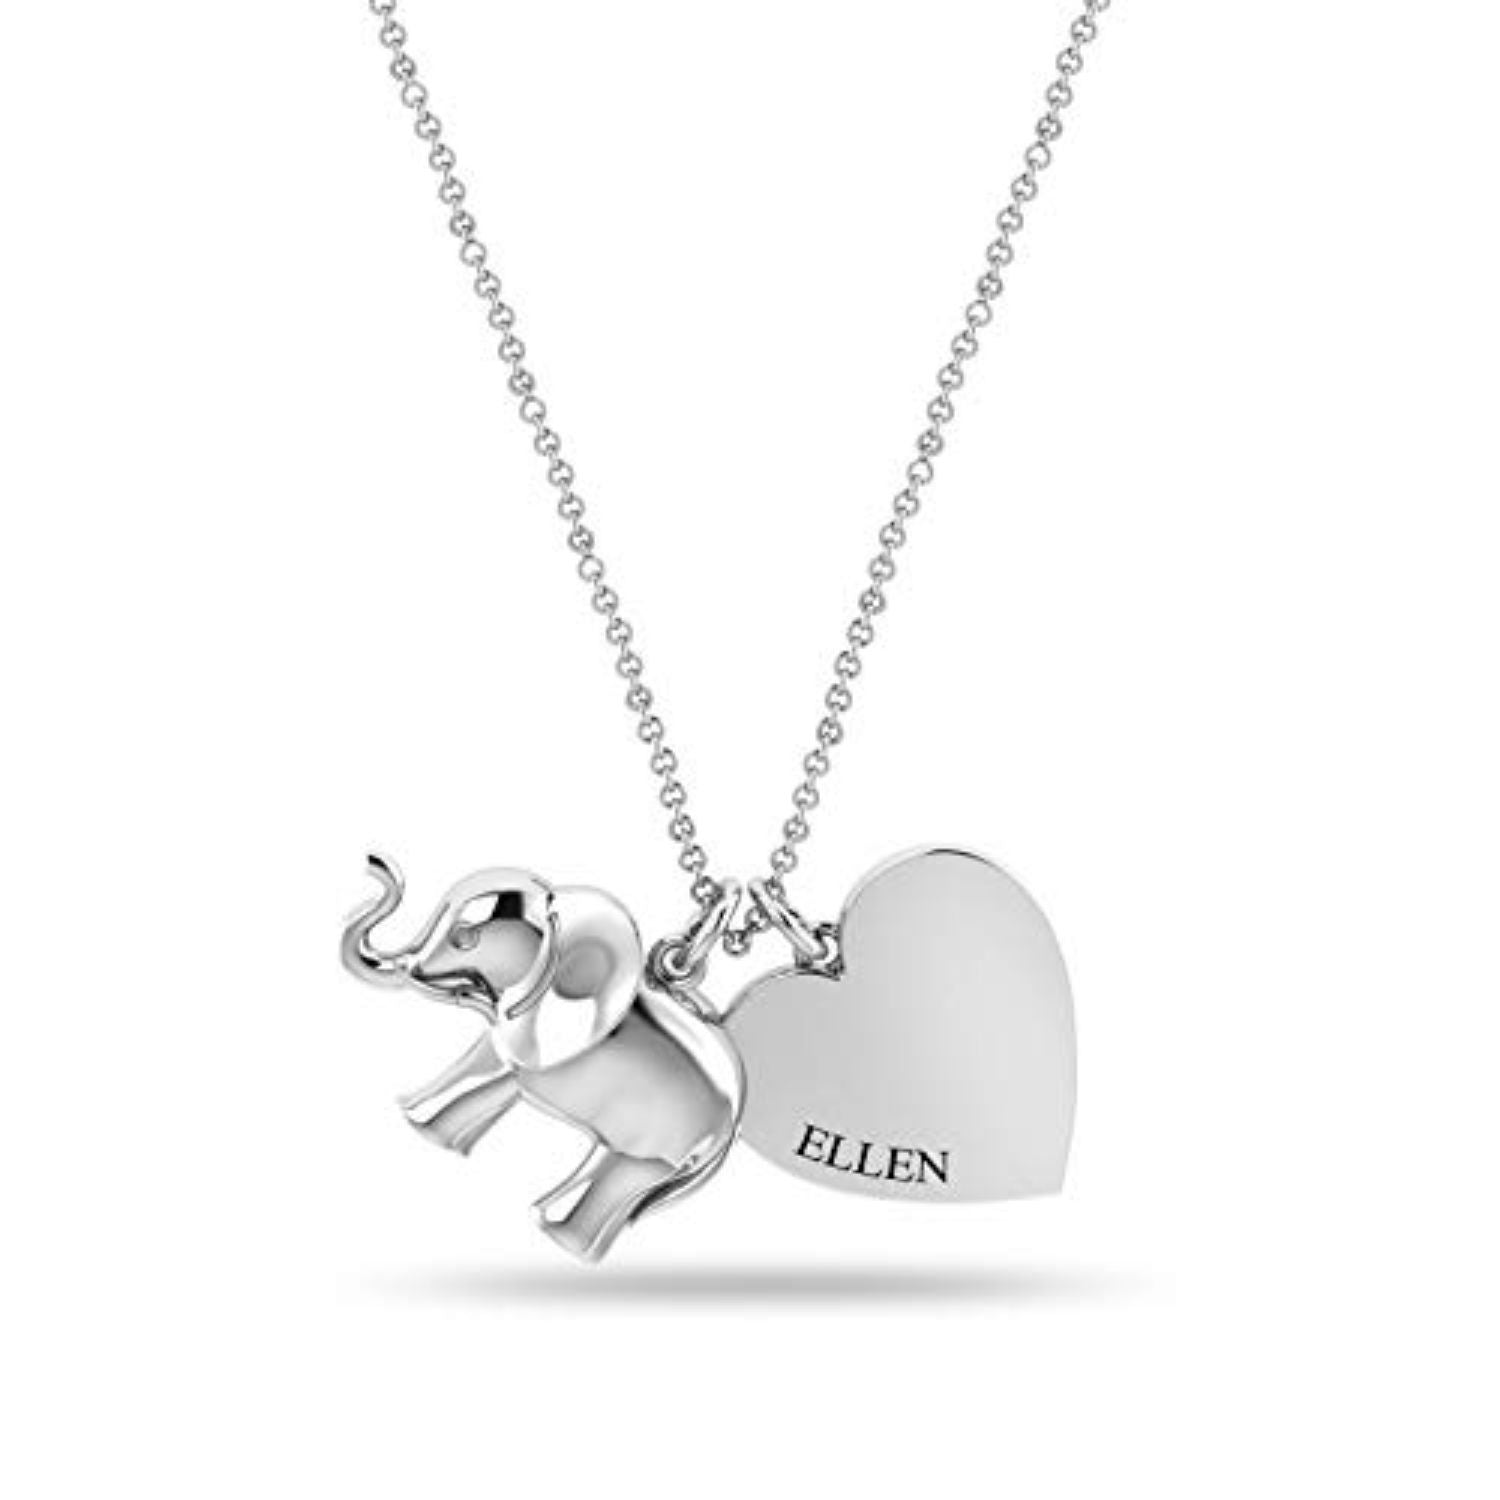 Personalised Elephant 925 Sterling Silver Pendant Necklace for Teen Women